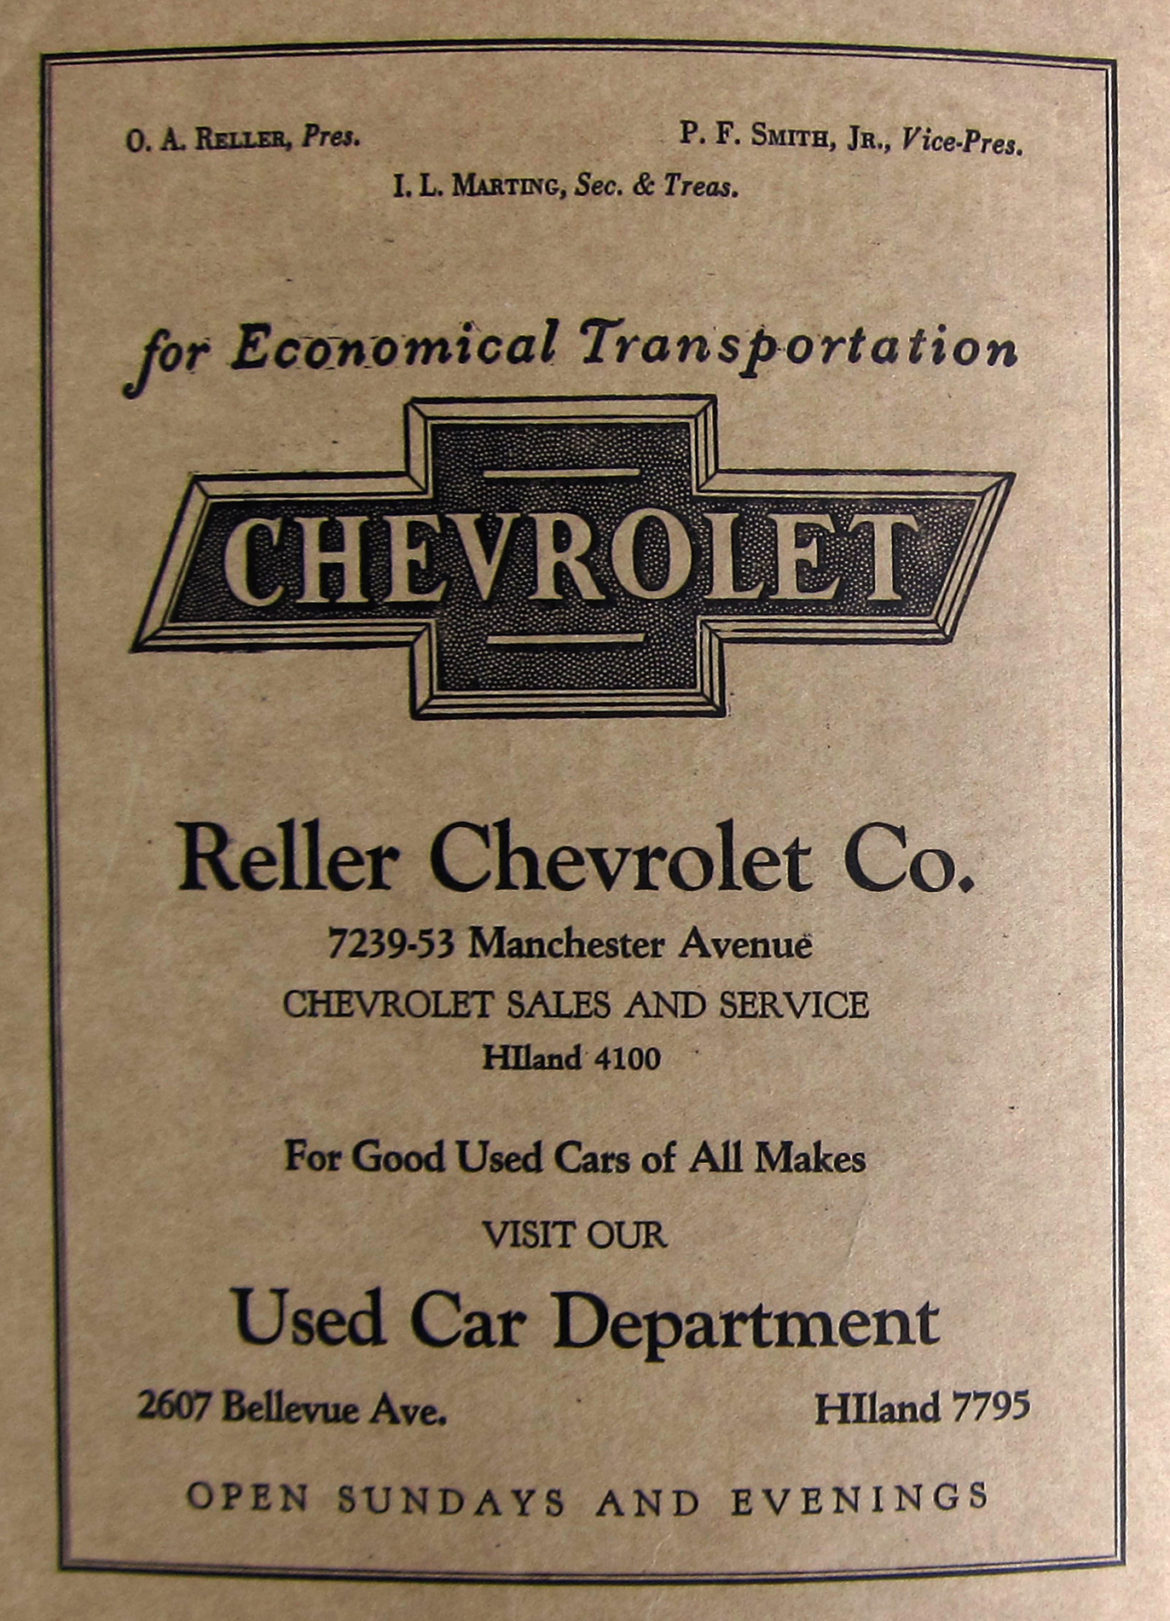 A Reller Chevrolet ad from the inside of the front cover of the 1930 Richmond Heights City Directory. Courtesy of Martin Fischer.